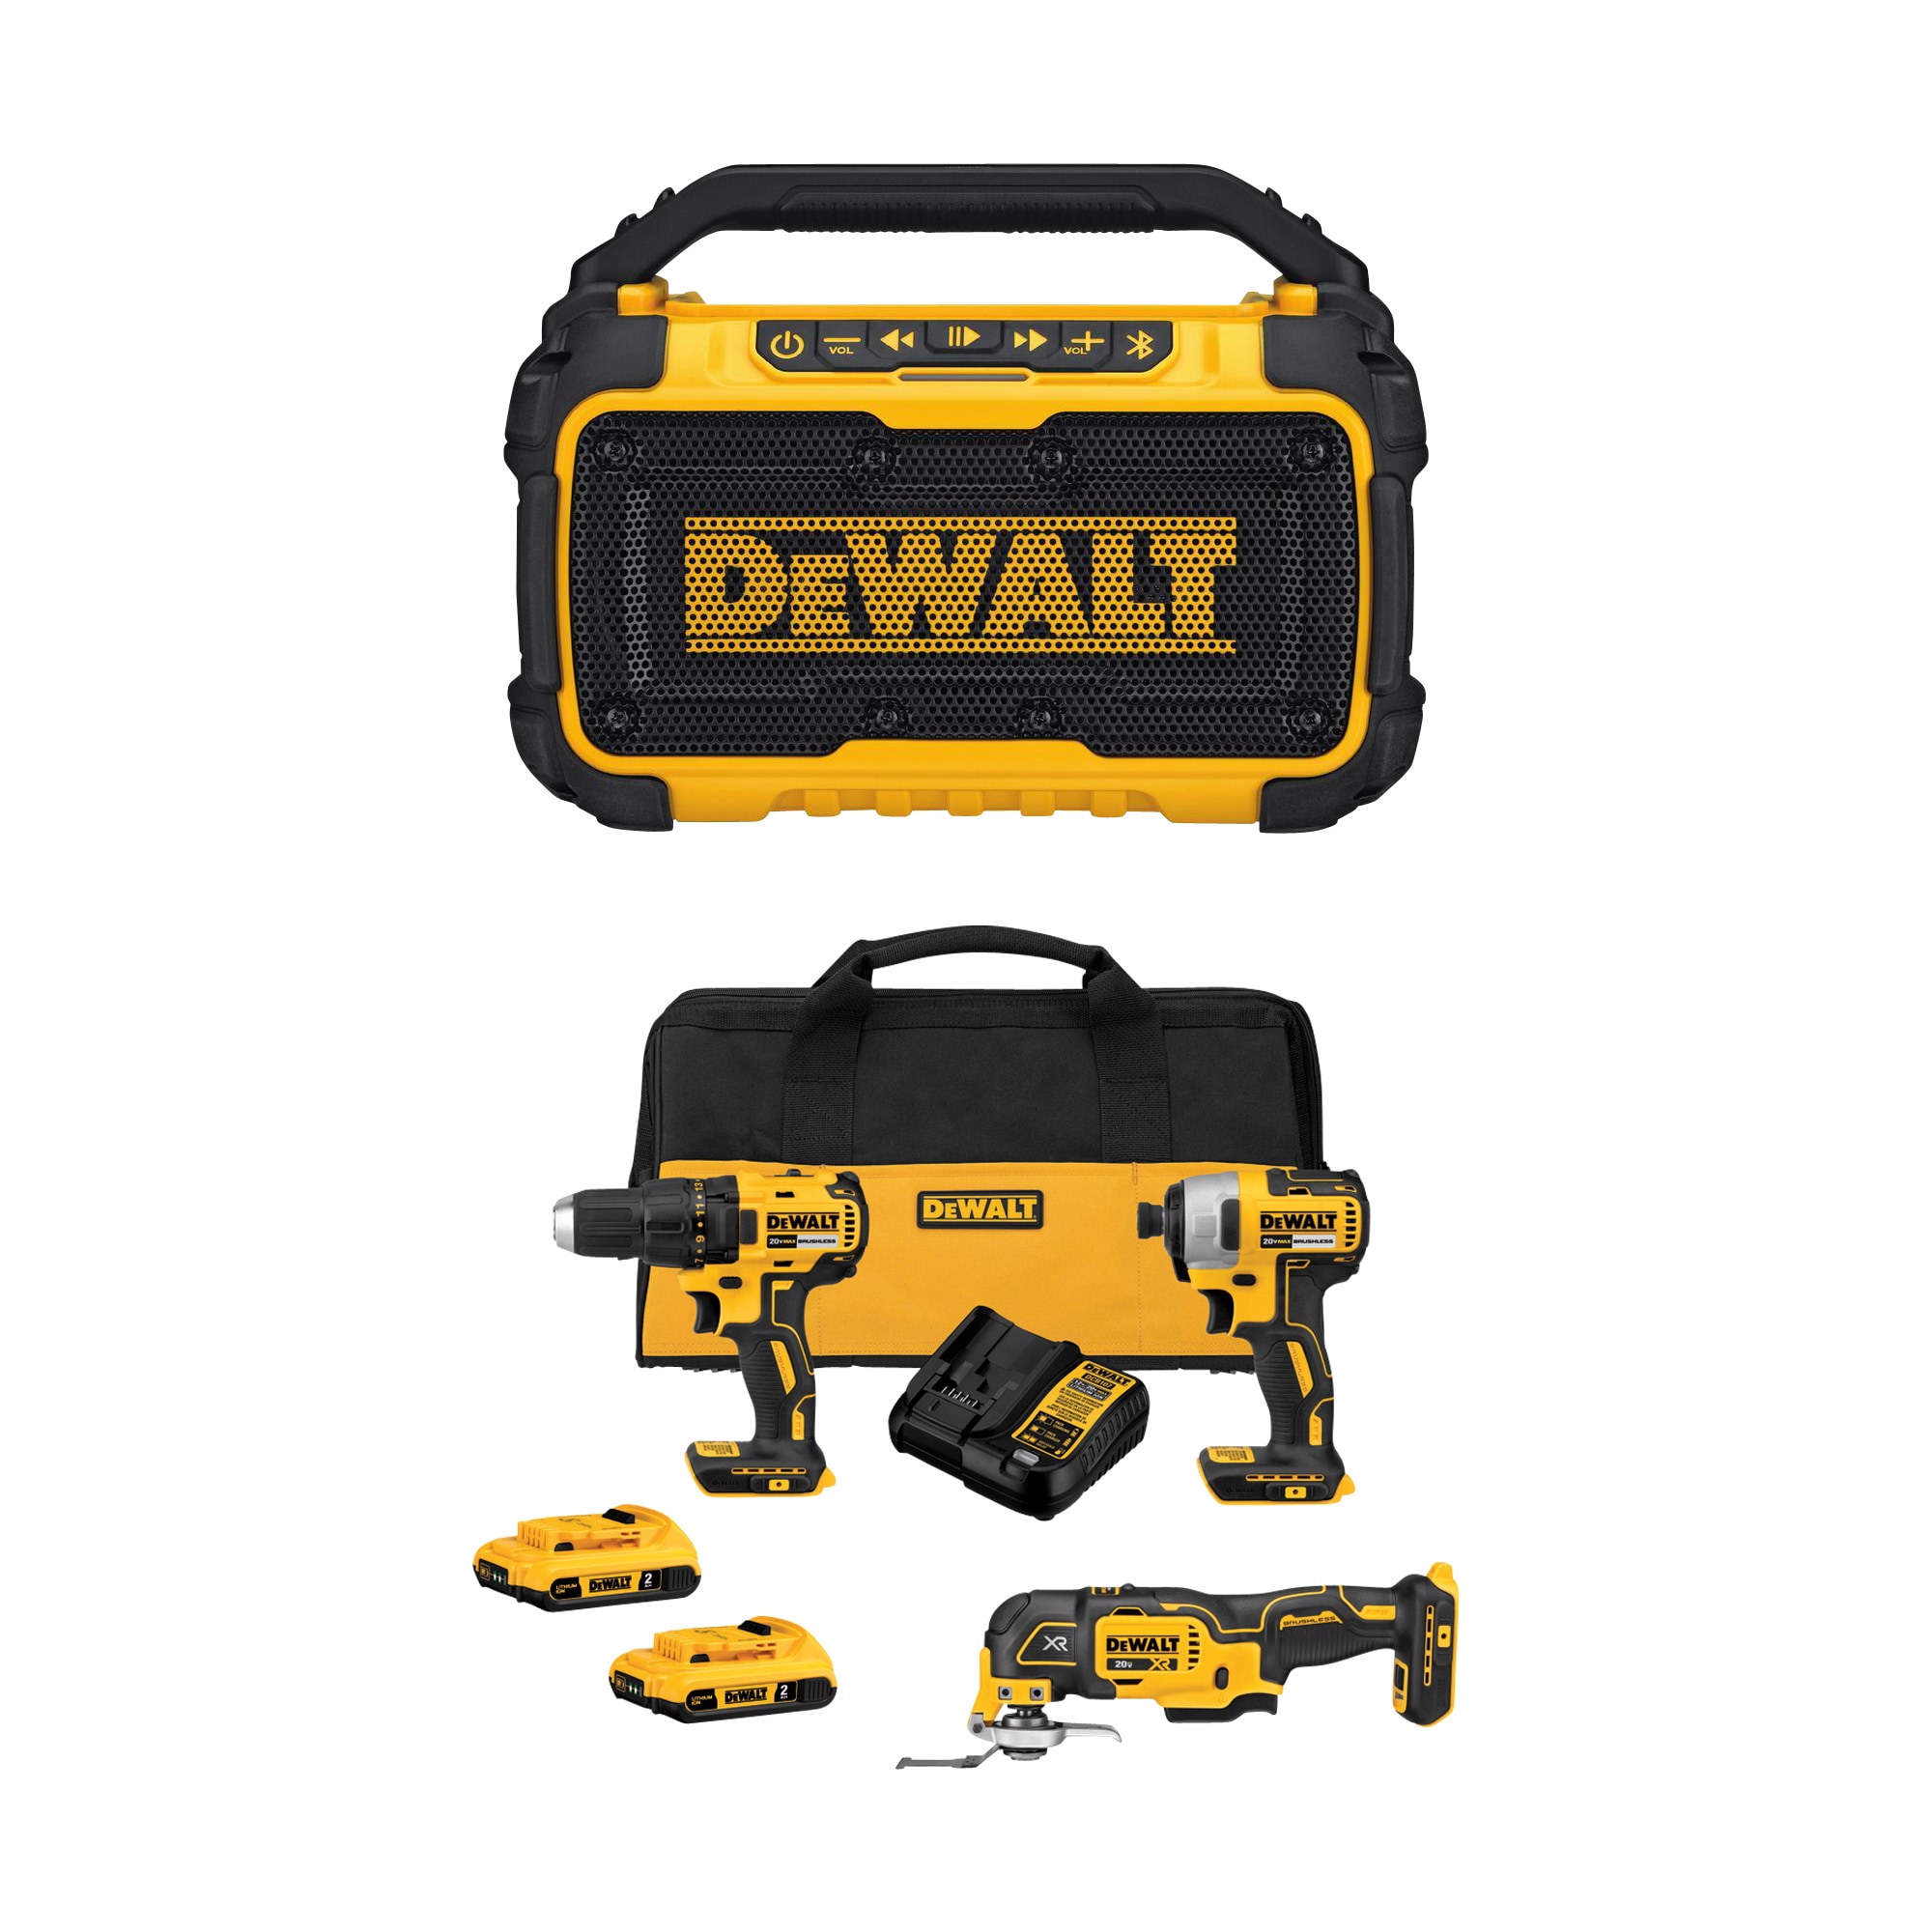 Dislocatie plaag rivaal Shop DEWALT 3-Tool 20-Volt Max Brushless Power Tool Combo Kit with Soft  Case (2-Batteries and charger Included) & 12-Volt or 20-Volt Max Cordless  Jobsite Bluetooth Speaker at Lowes.com